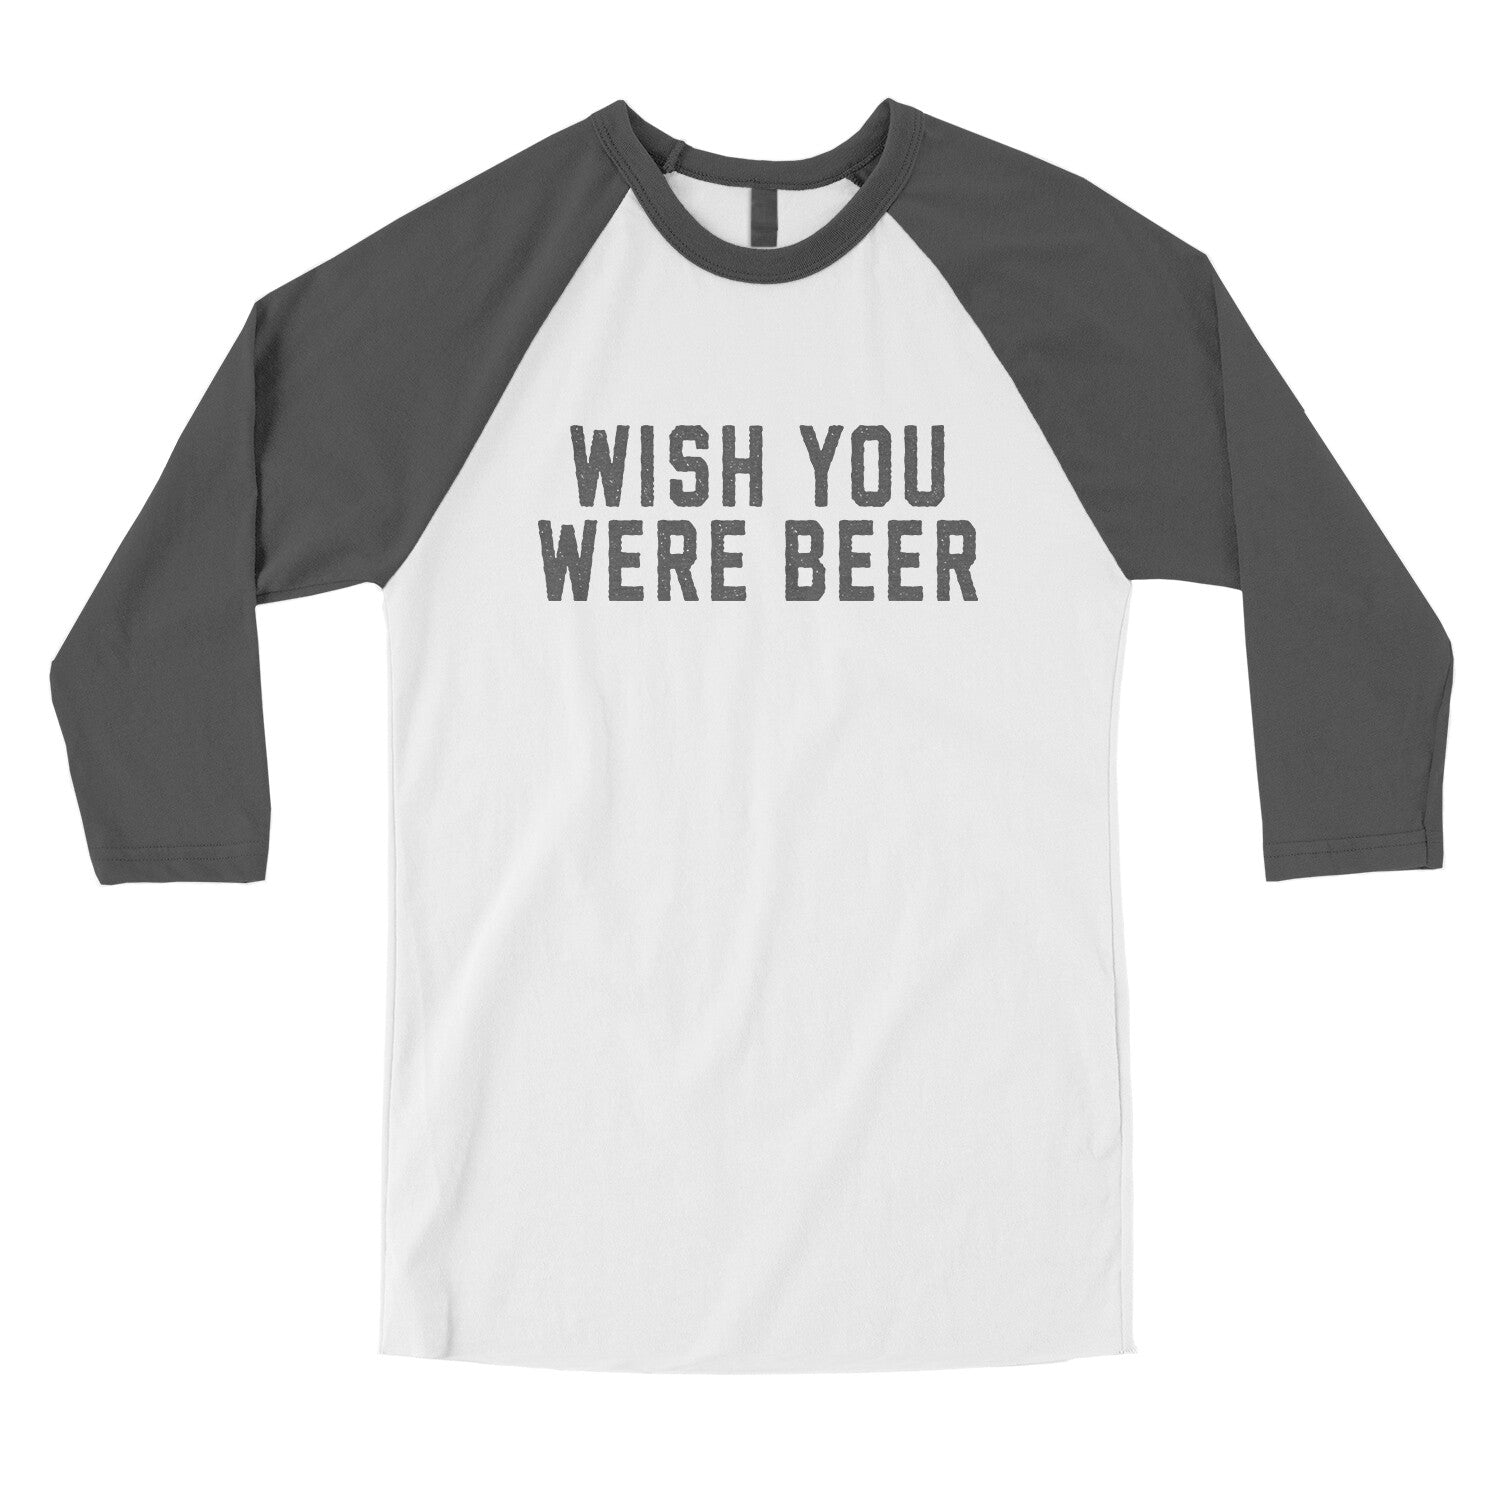 Wish You Were Beer in White with Asphalt Color